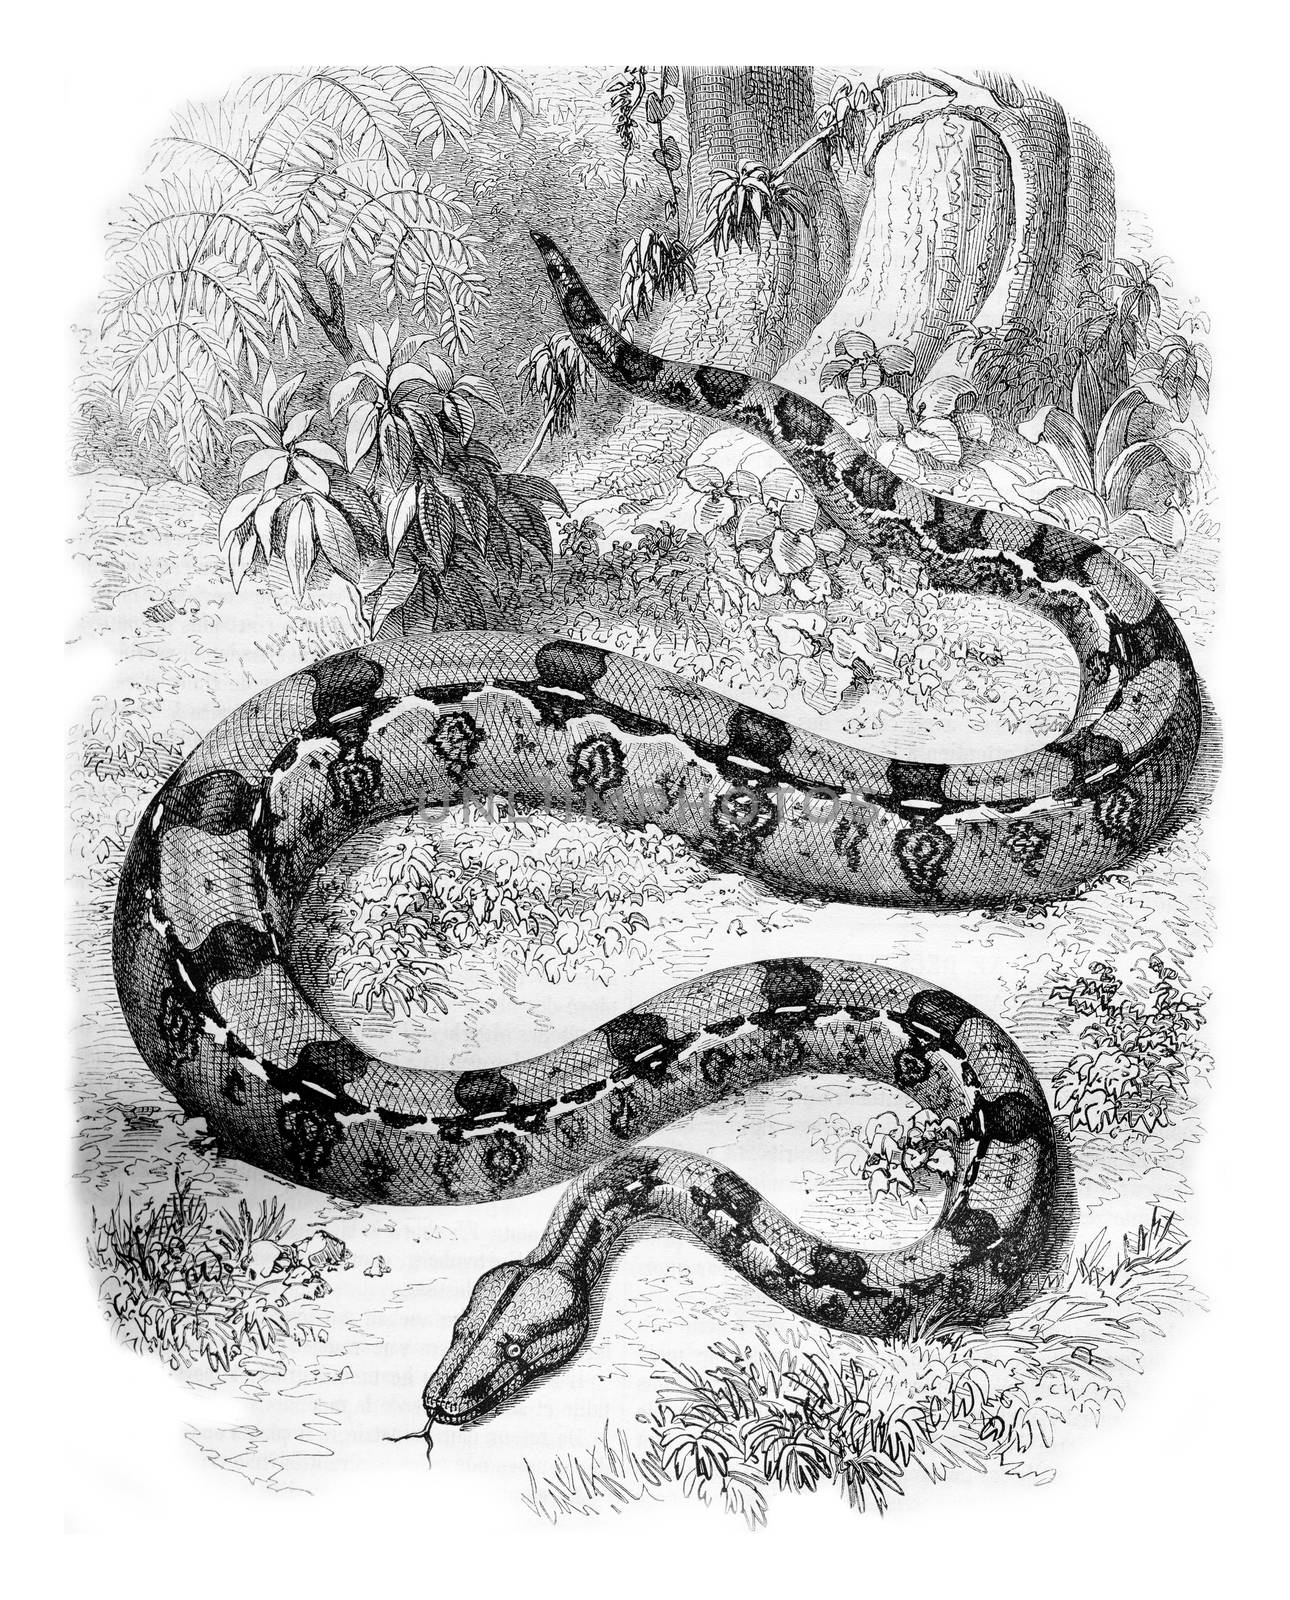 The Sucuruhyu or Boa gigas, vintage engraving. by Morphart